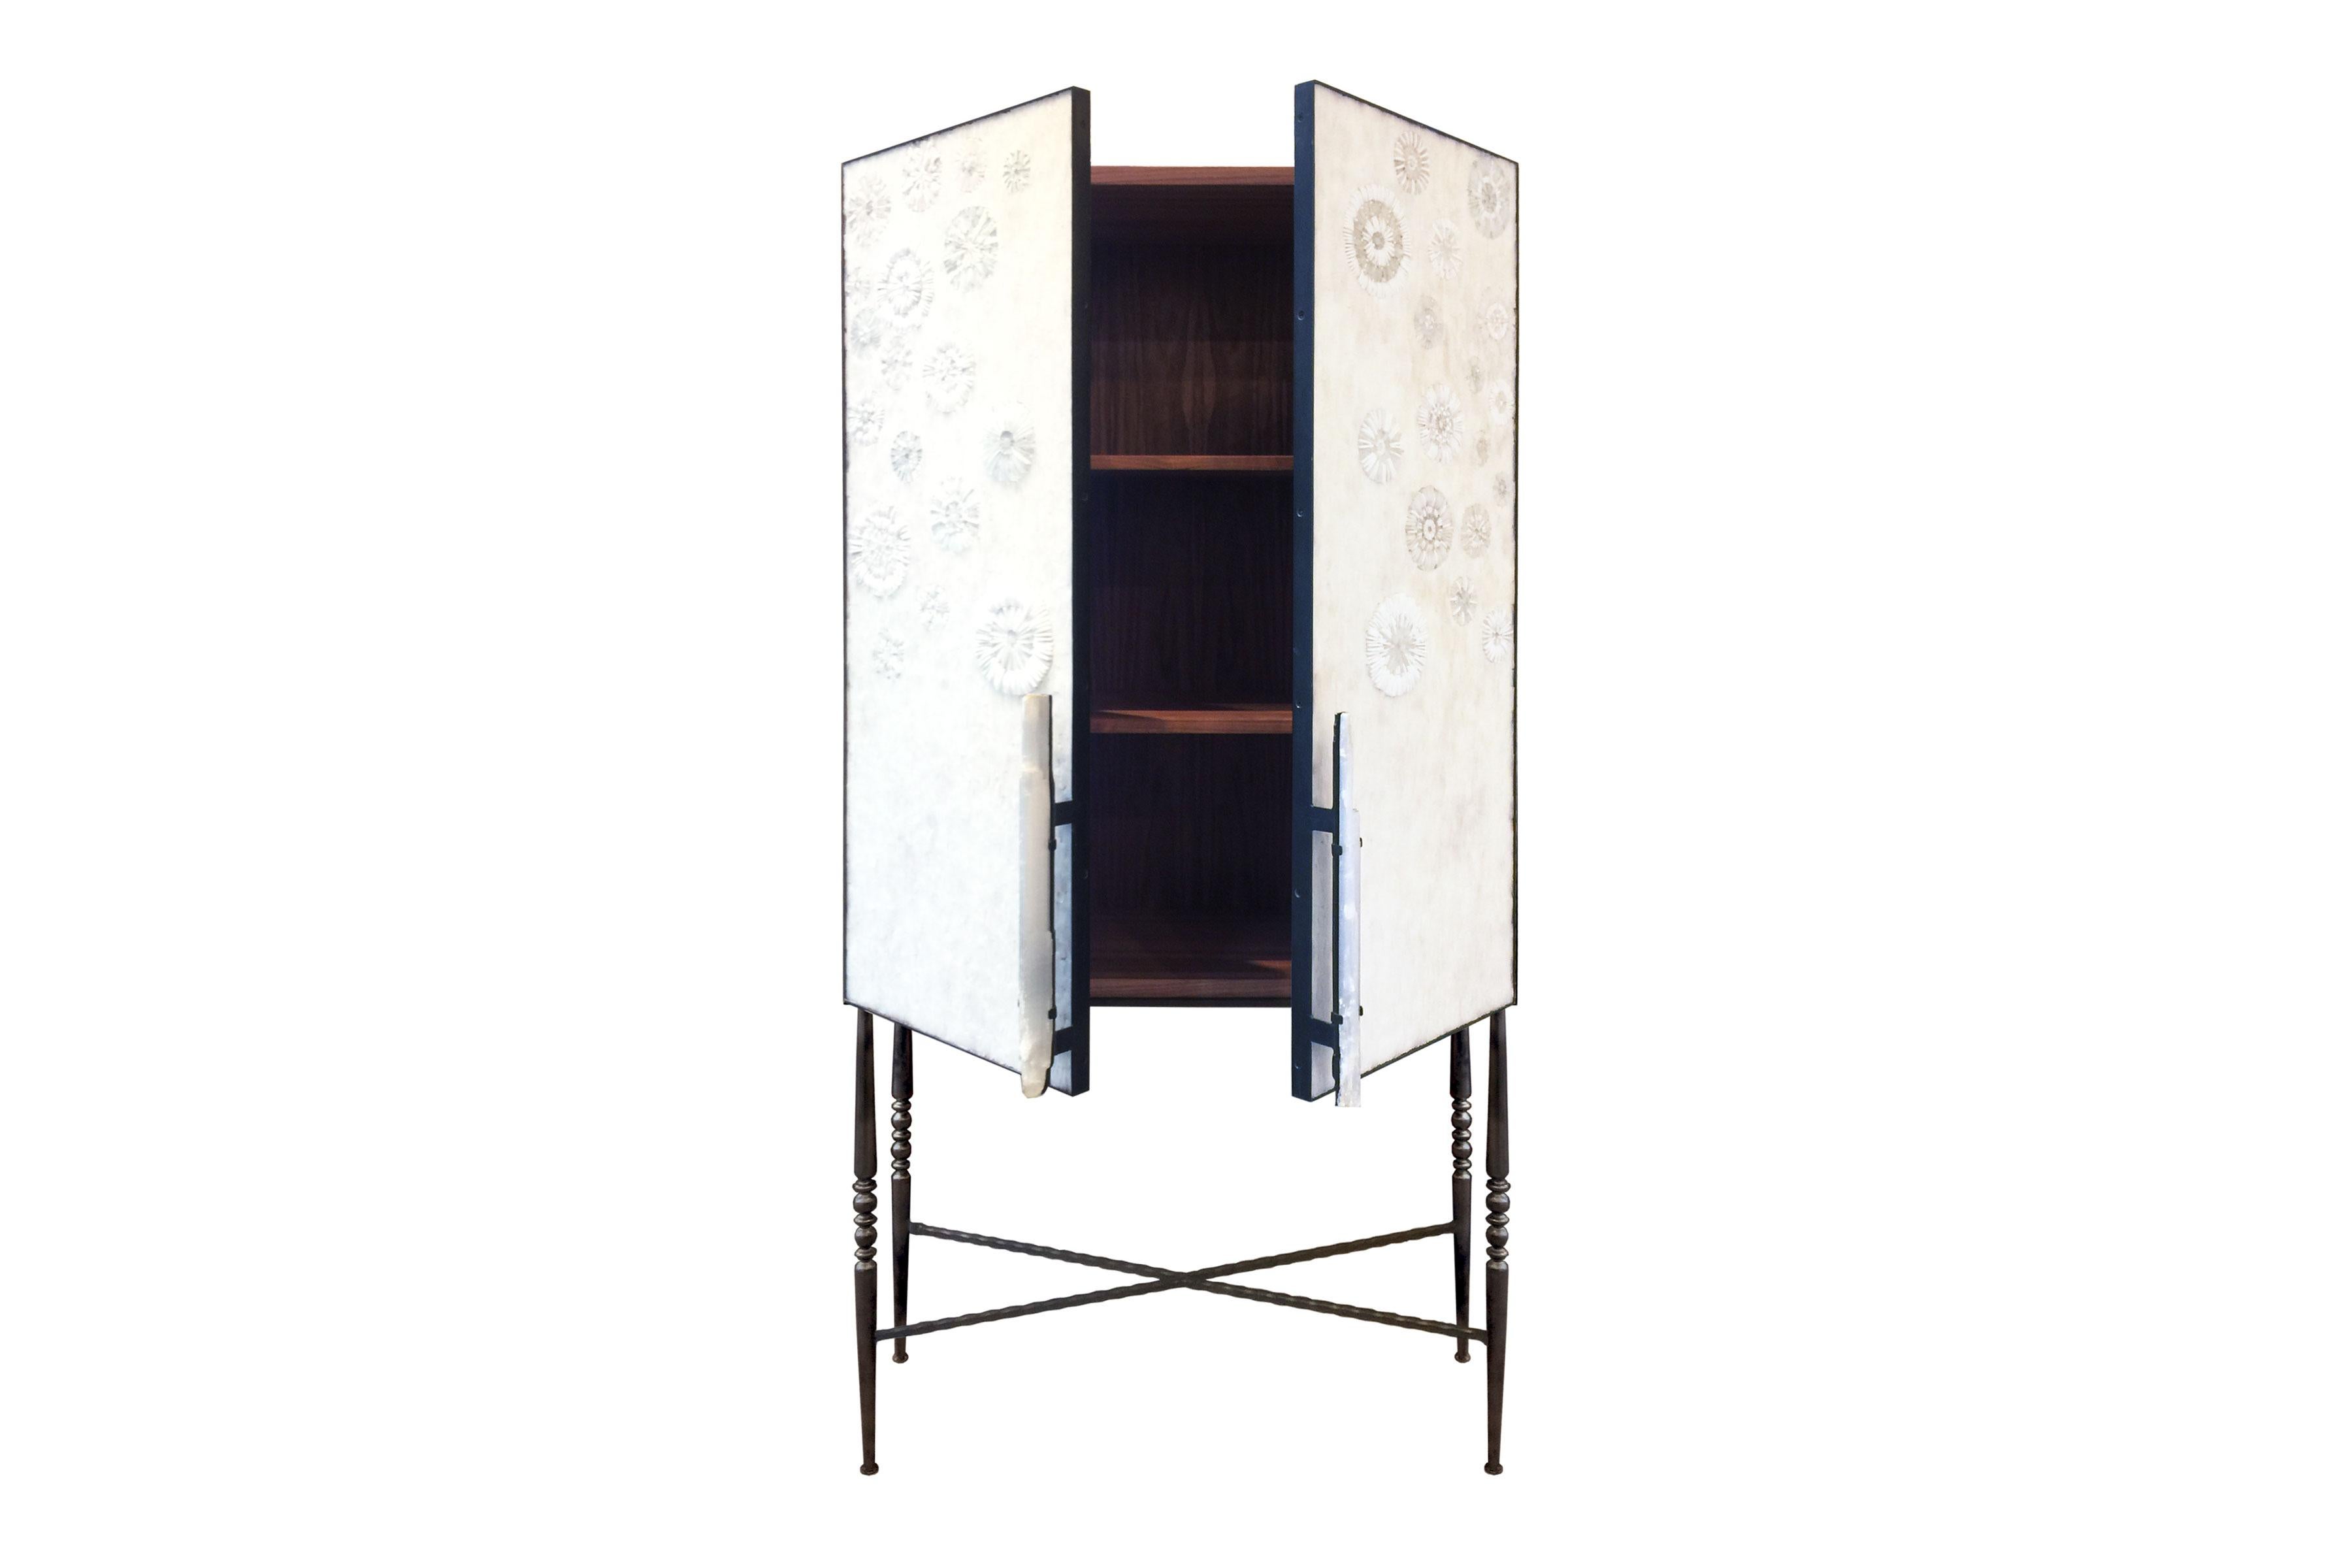 The Blossom bar cabinet by Ercole Home has a 2-door front, with natural wood finish on walnut.
Handcut glass mosaic in variety shades of white and ivory decorate the surface in Blossom and shards mosaic patterns.
Doors and selenite handles are